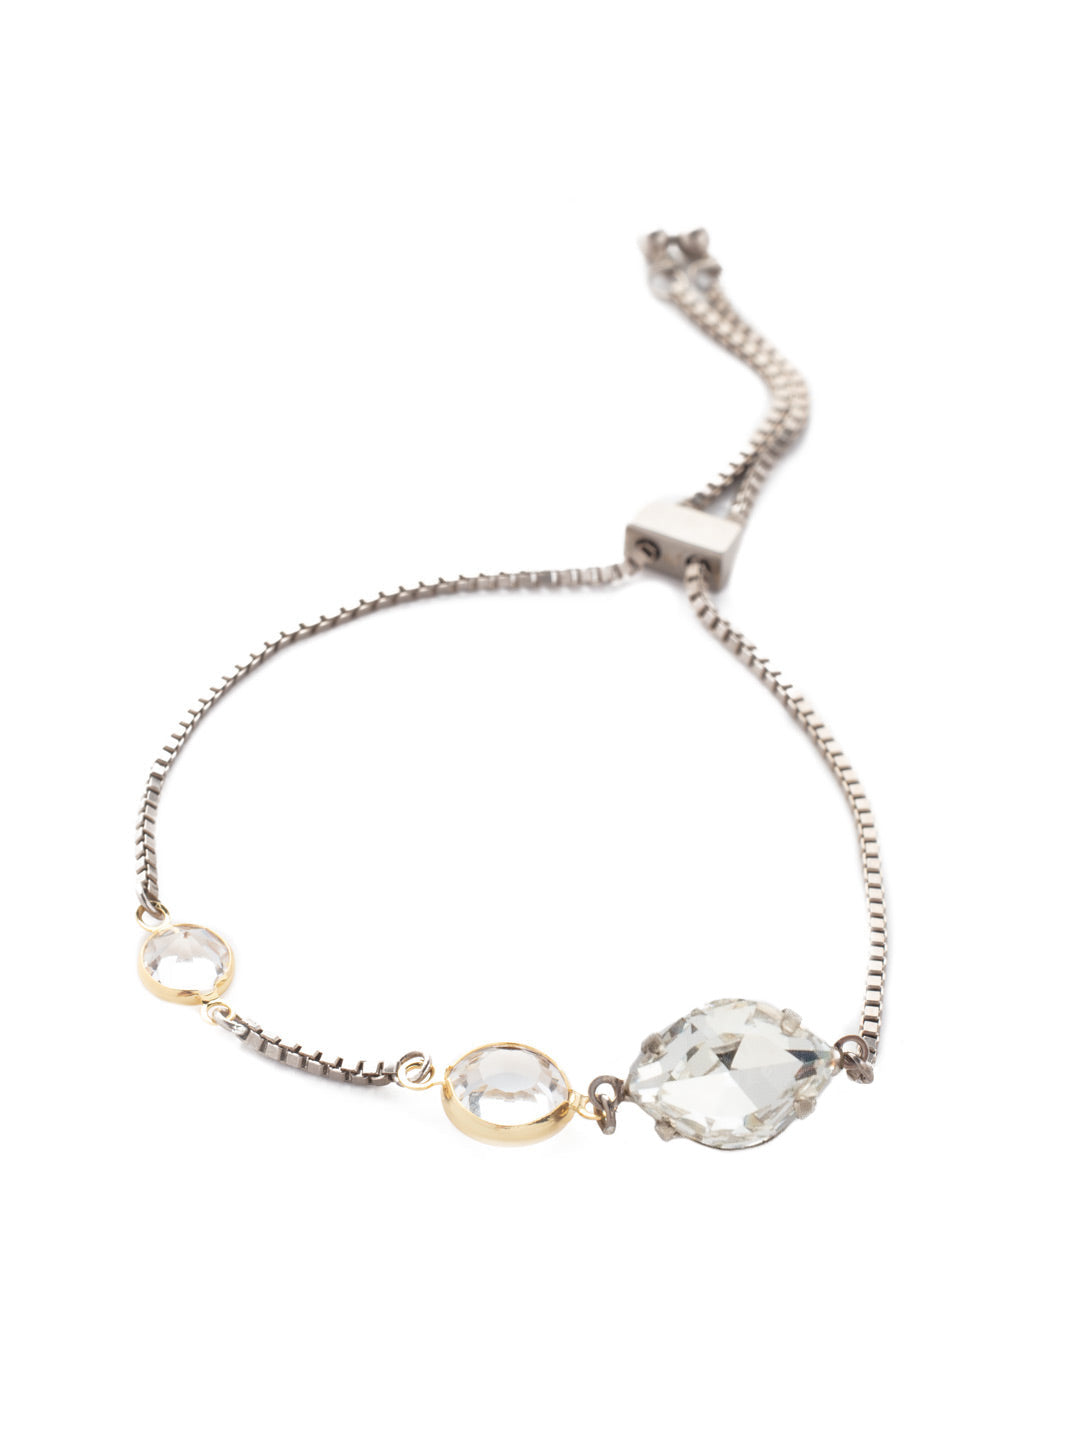 Michaela Slider Bracelet - 4BEN8MXCRY - <p>The Michaela Slider Bracelet is sophistication simplified. Slip it on and show off the fun metal chain dotted with shining crystals in light and dark tones. From Sorrelli's Crystal collection in our Mixed Metal finish.</p>